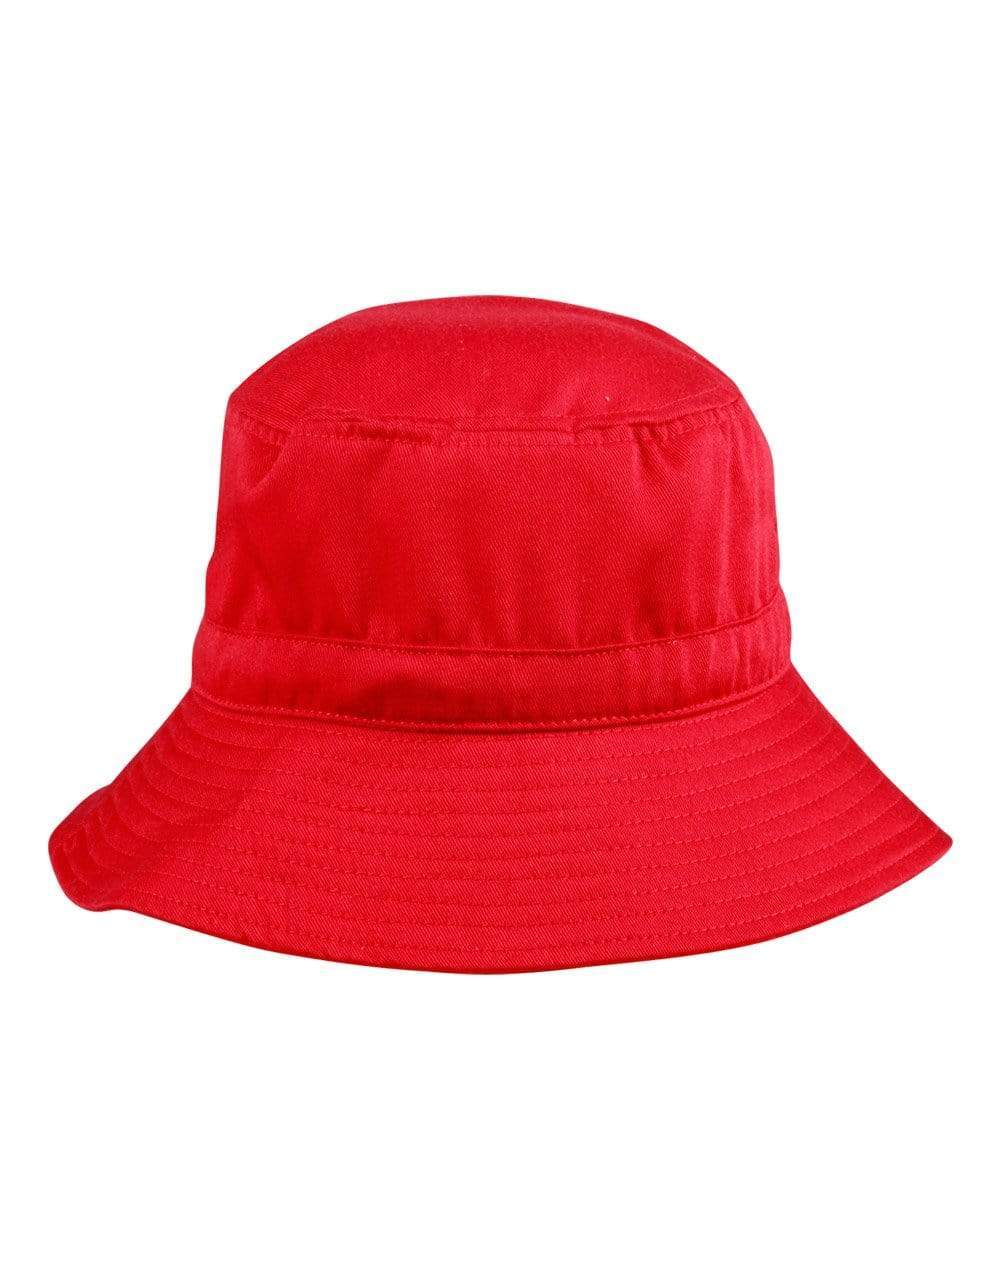 Winning Spirit Active Wear Bucket Hat With Toggle H1034